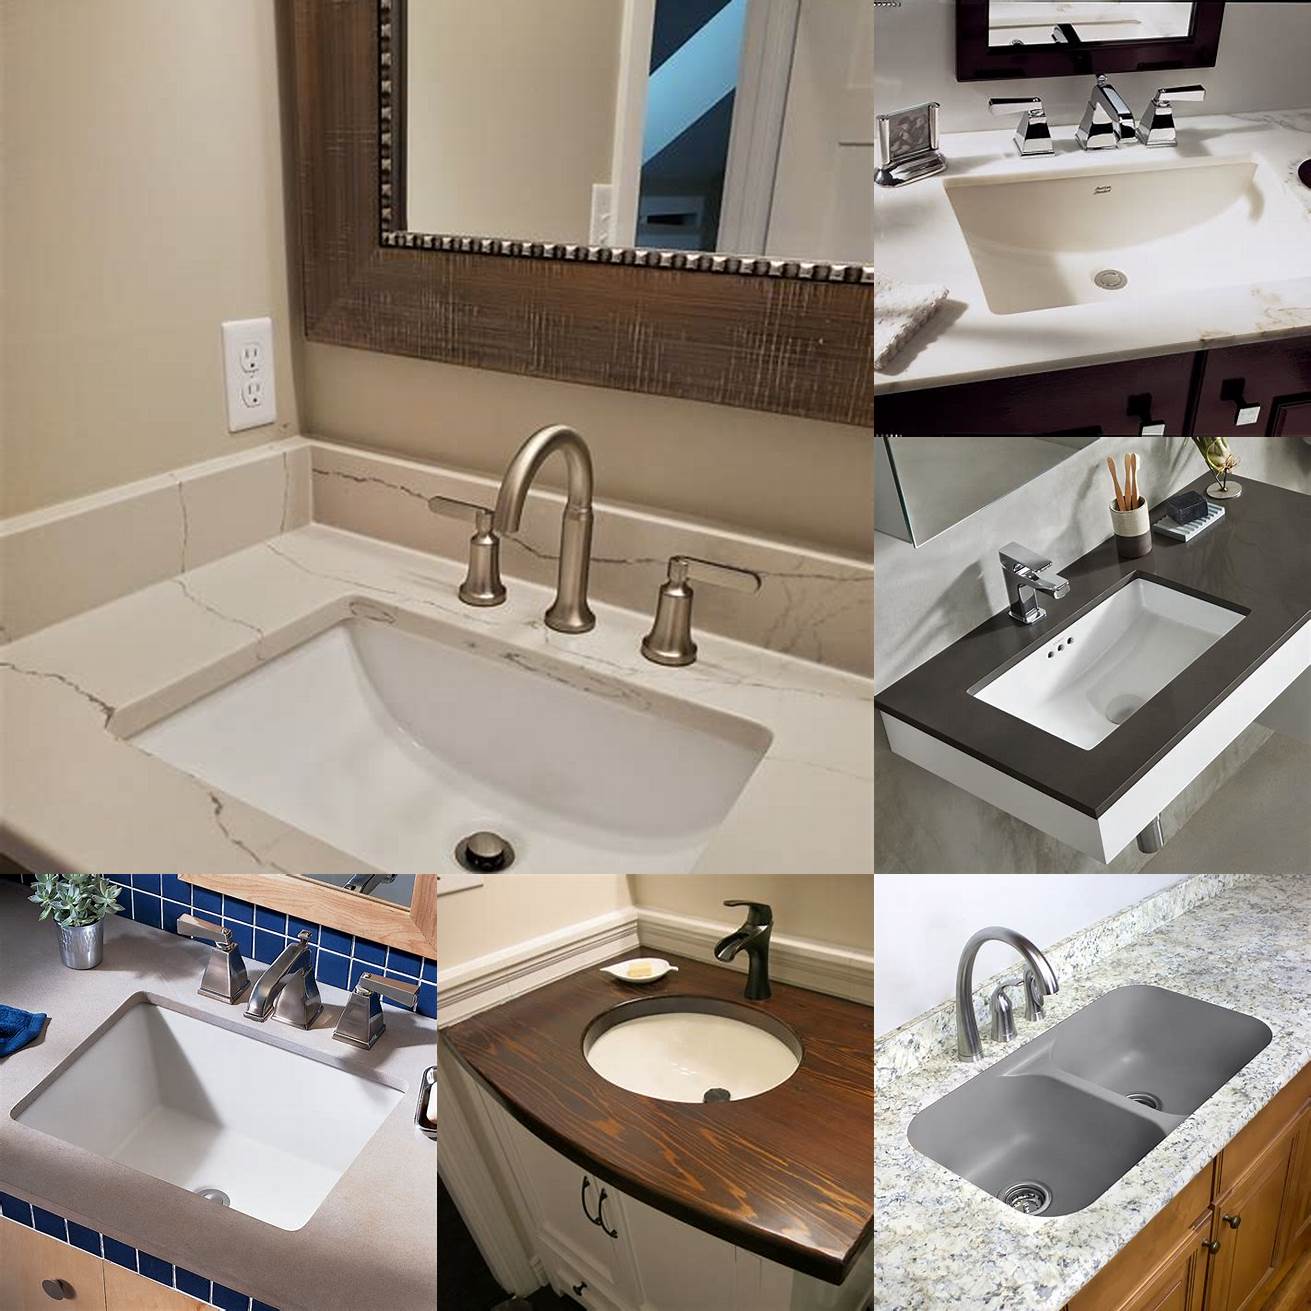 Undermount sinks are installed below the countertop giving your bathroom a seamless and sleek look They are easy to clean and maintain and provide more countertop space than other types of sinks However they require professional installation and can be more expensive than other types of sinks